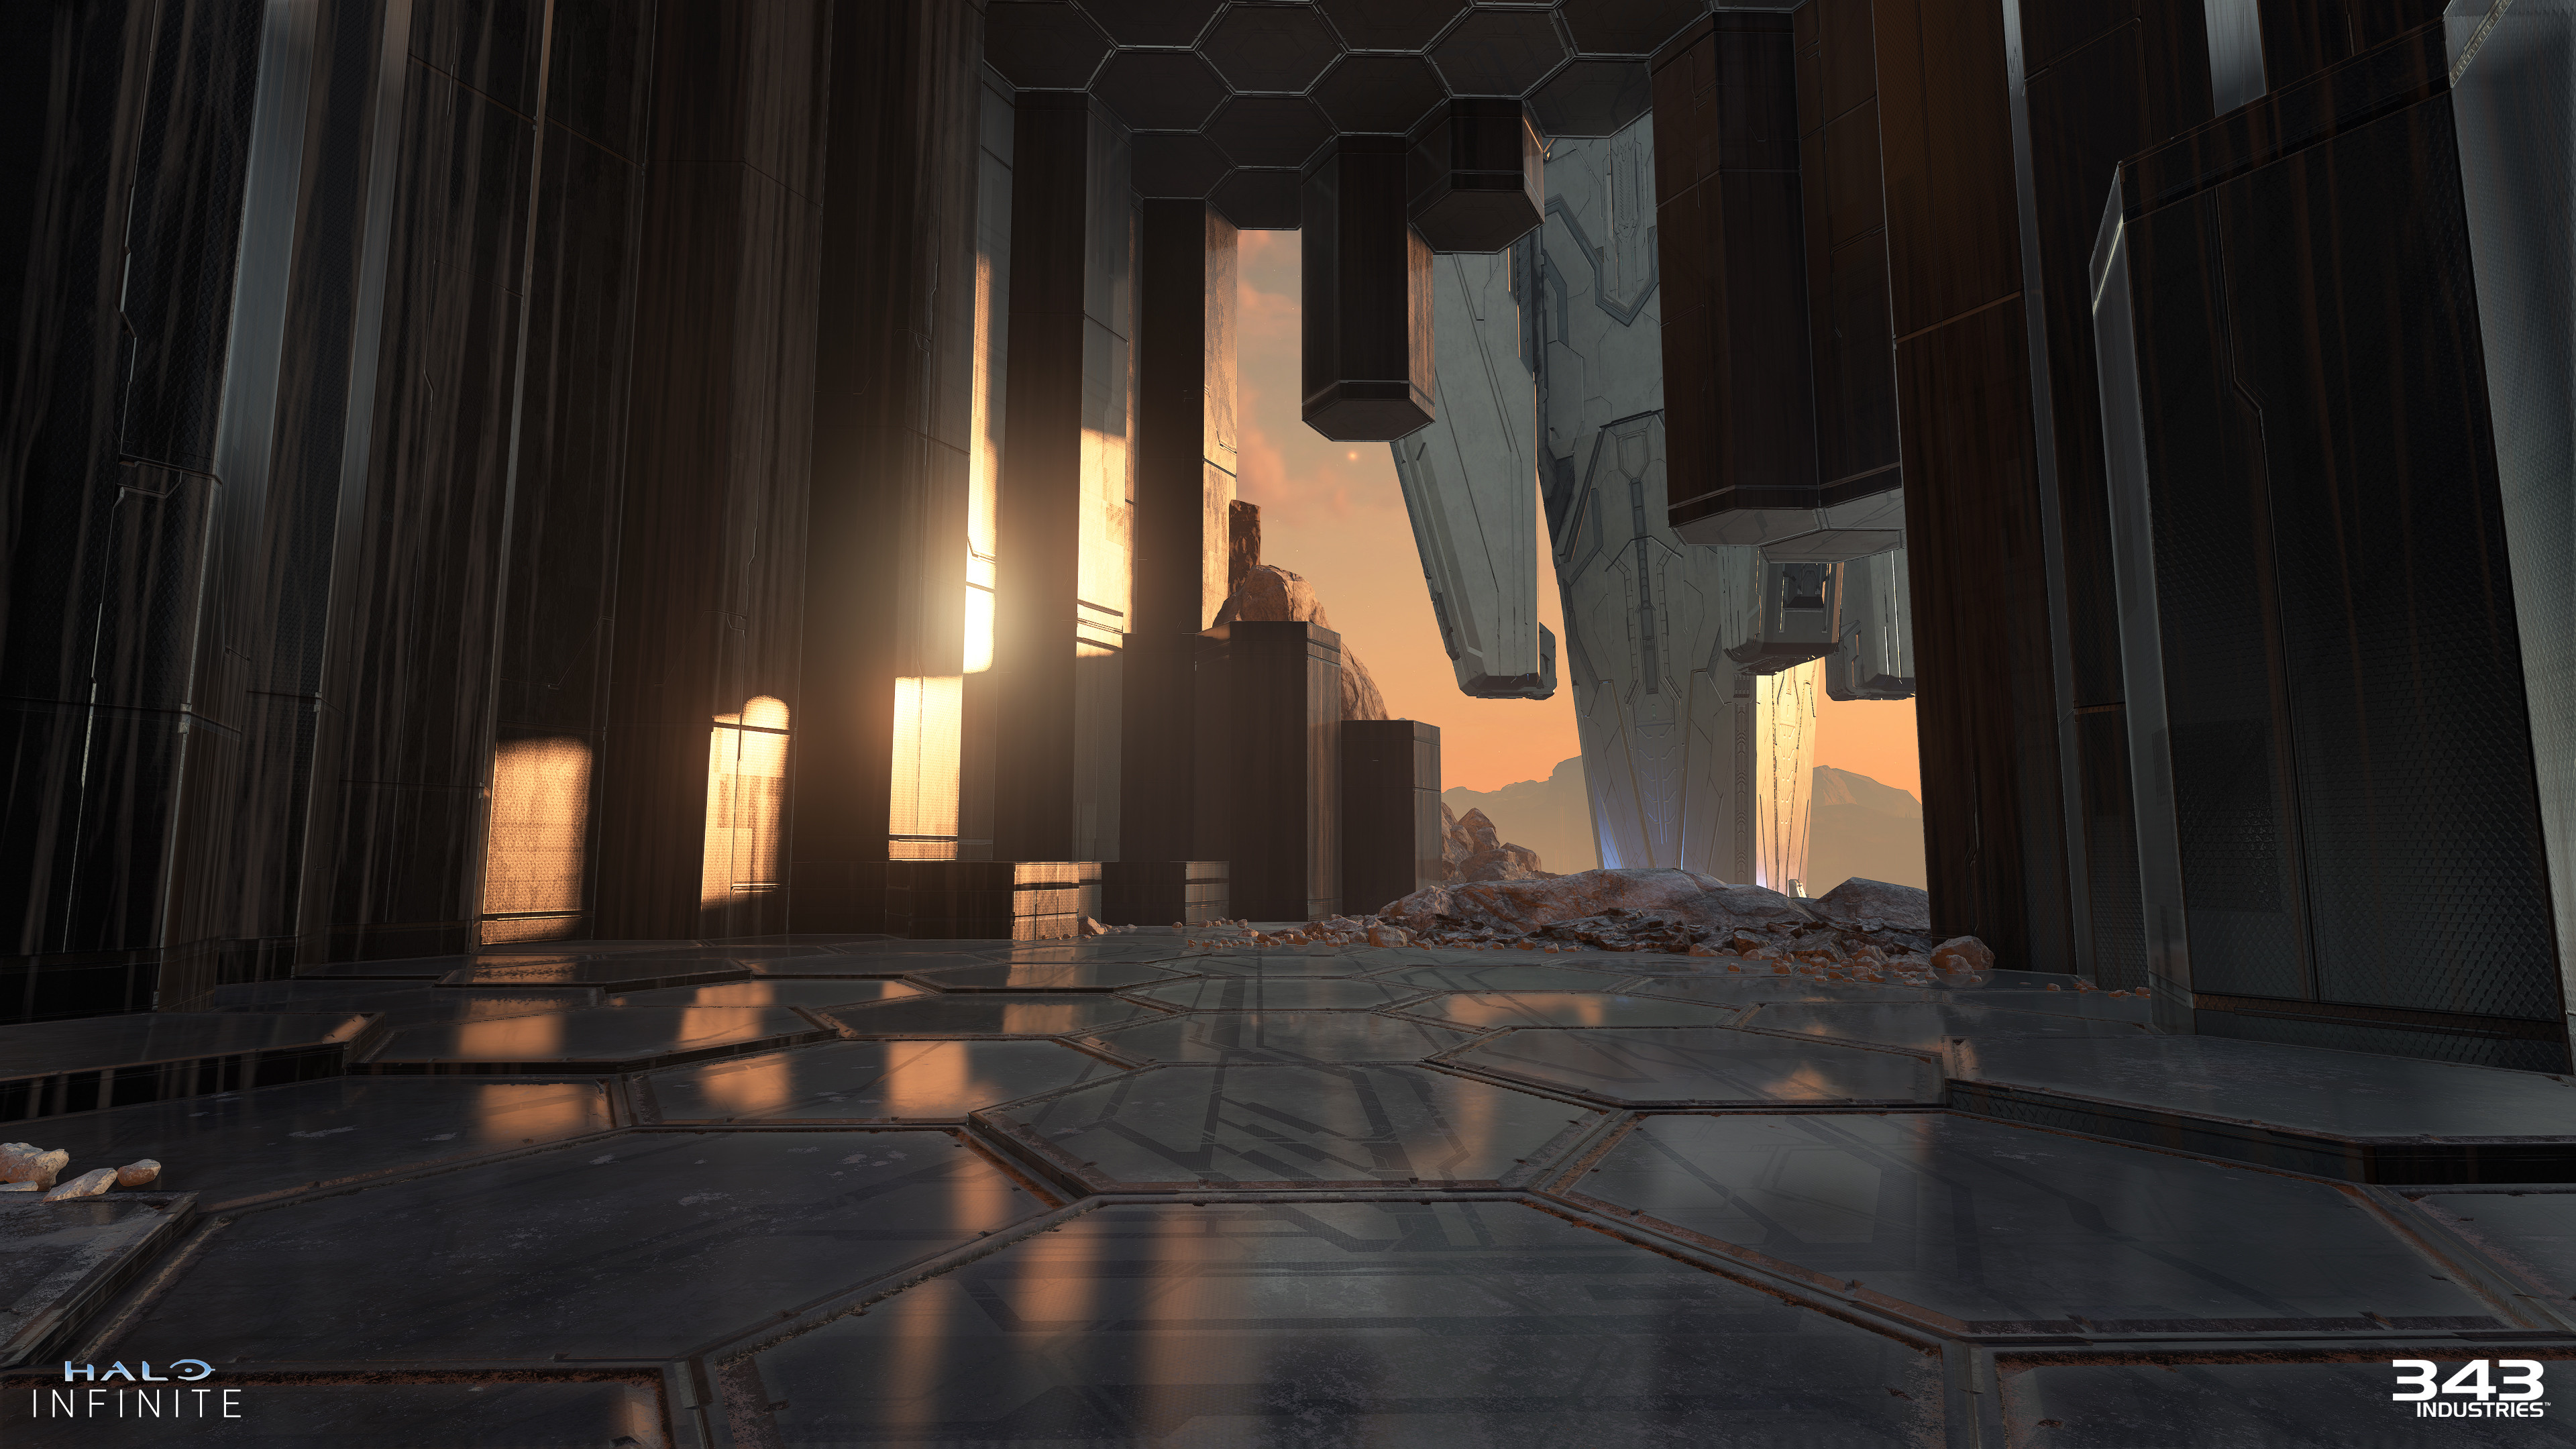 With the forerunner metal being so prominent, it meant quite a lot of cubemaps were utilized throughout these environments.